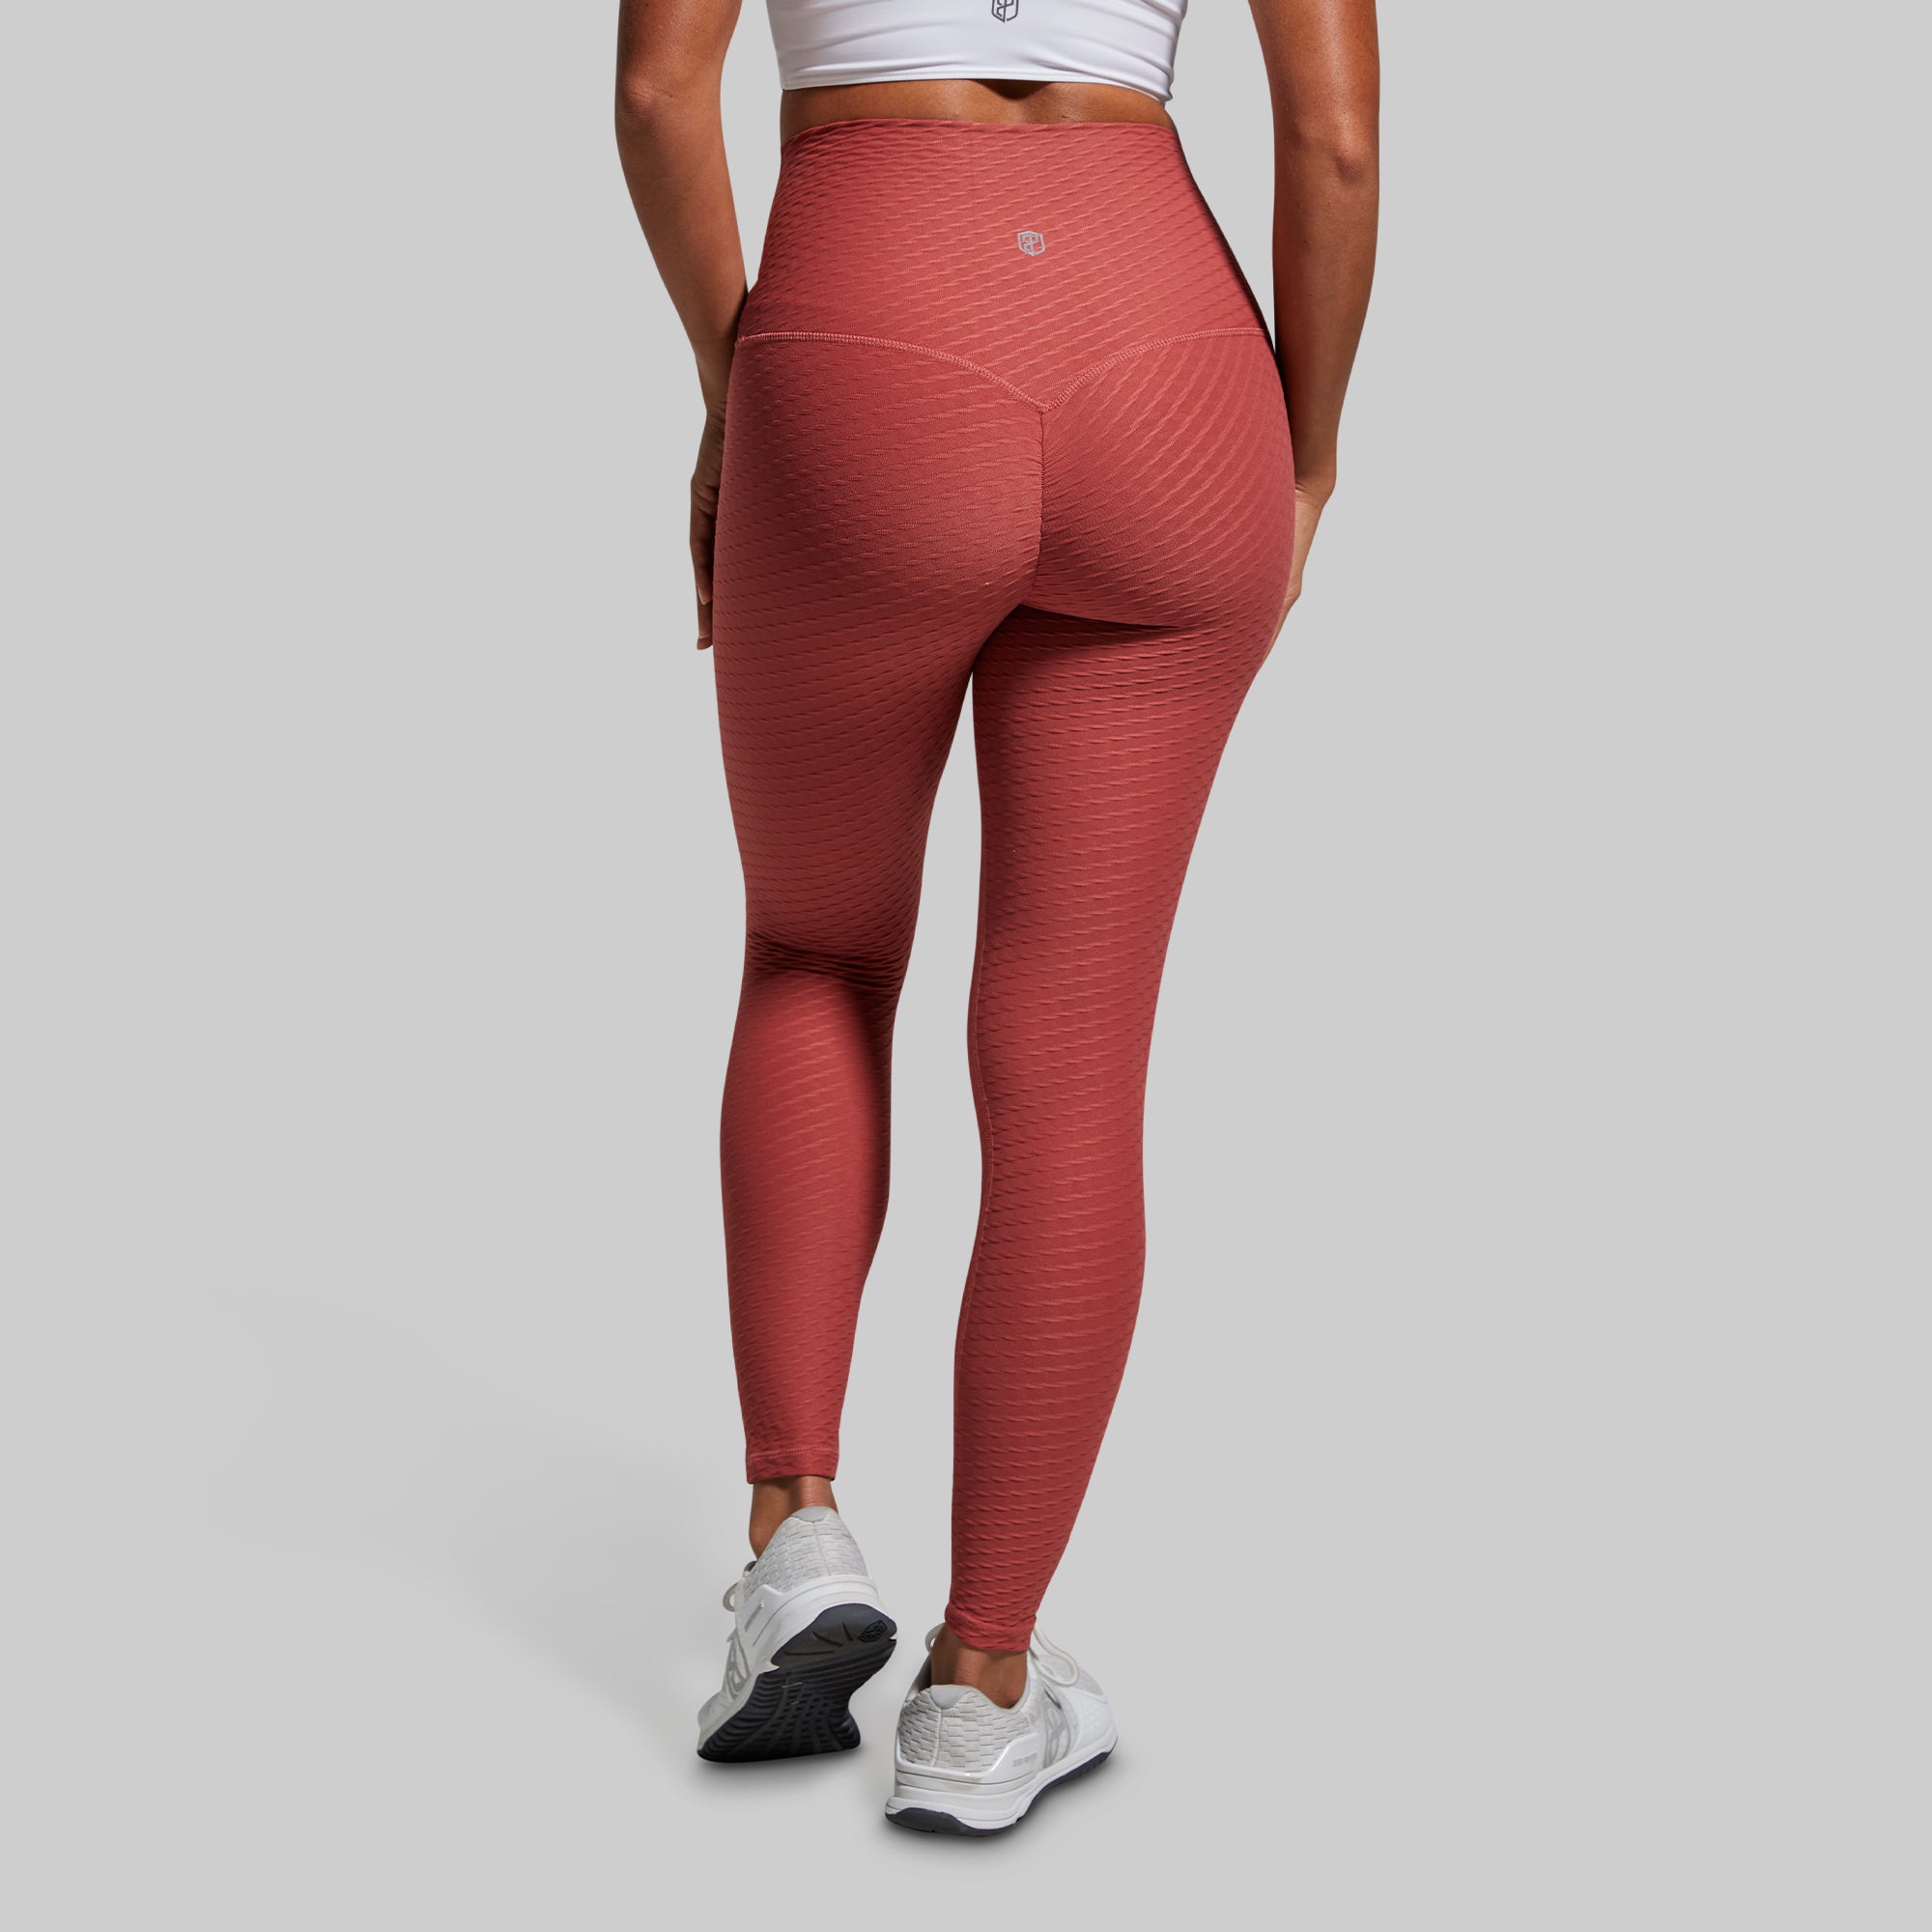 Personalized Wholesale Nylon Spandex Butt Lift Yoga Leggings Manufacturers  In USA, AUS, CA And UAE